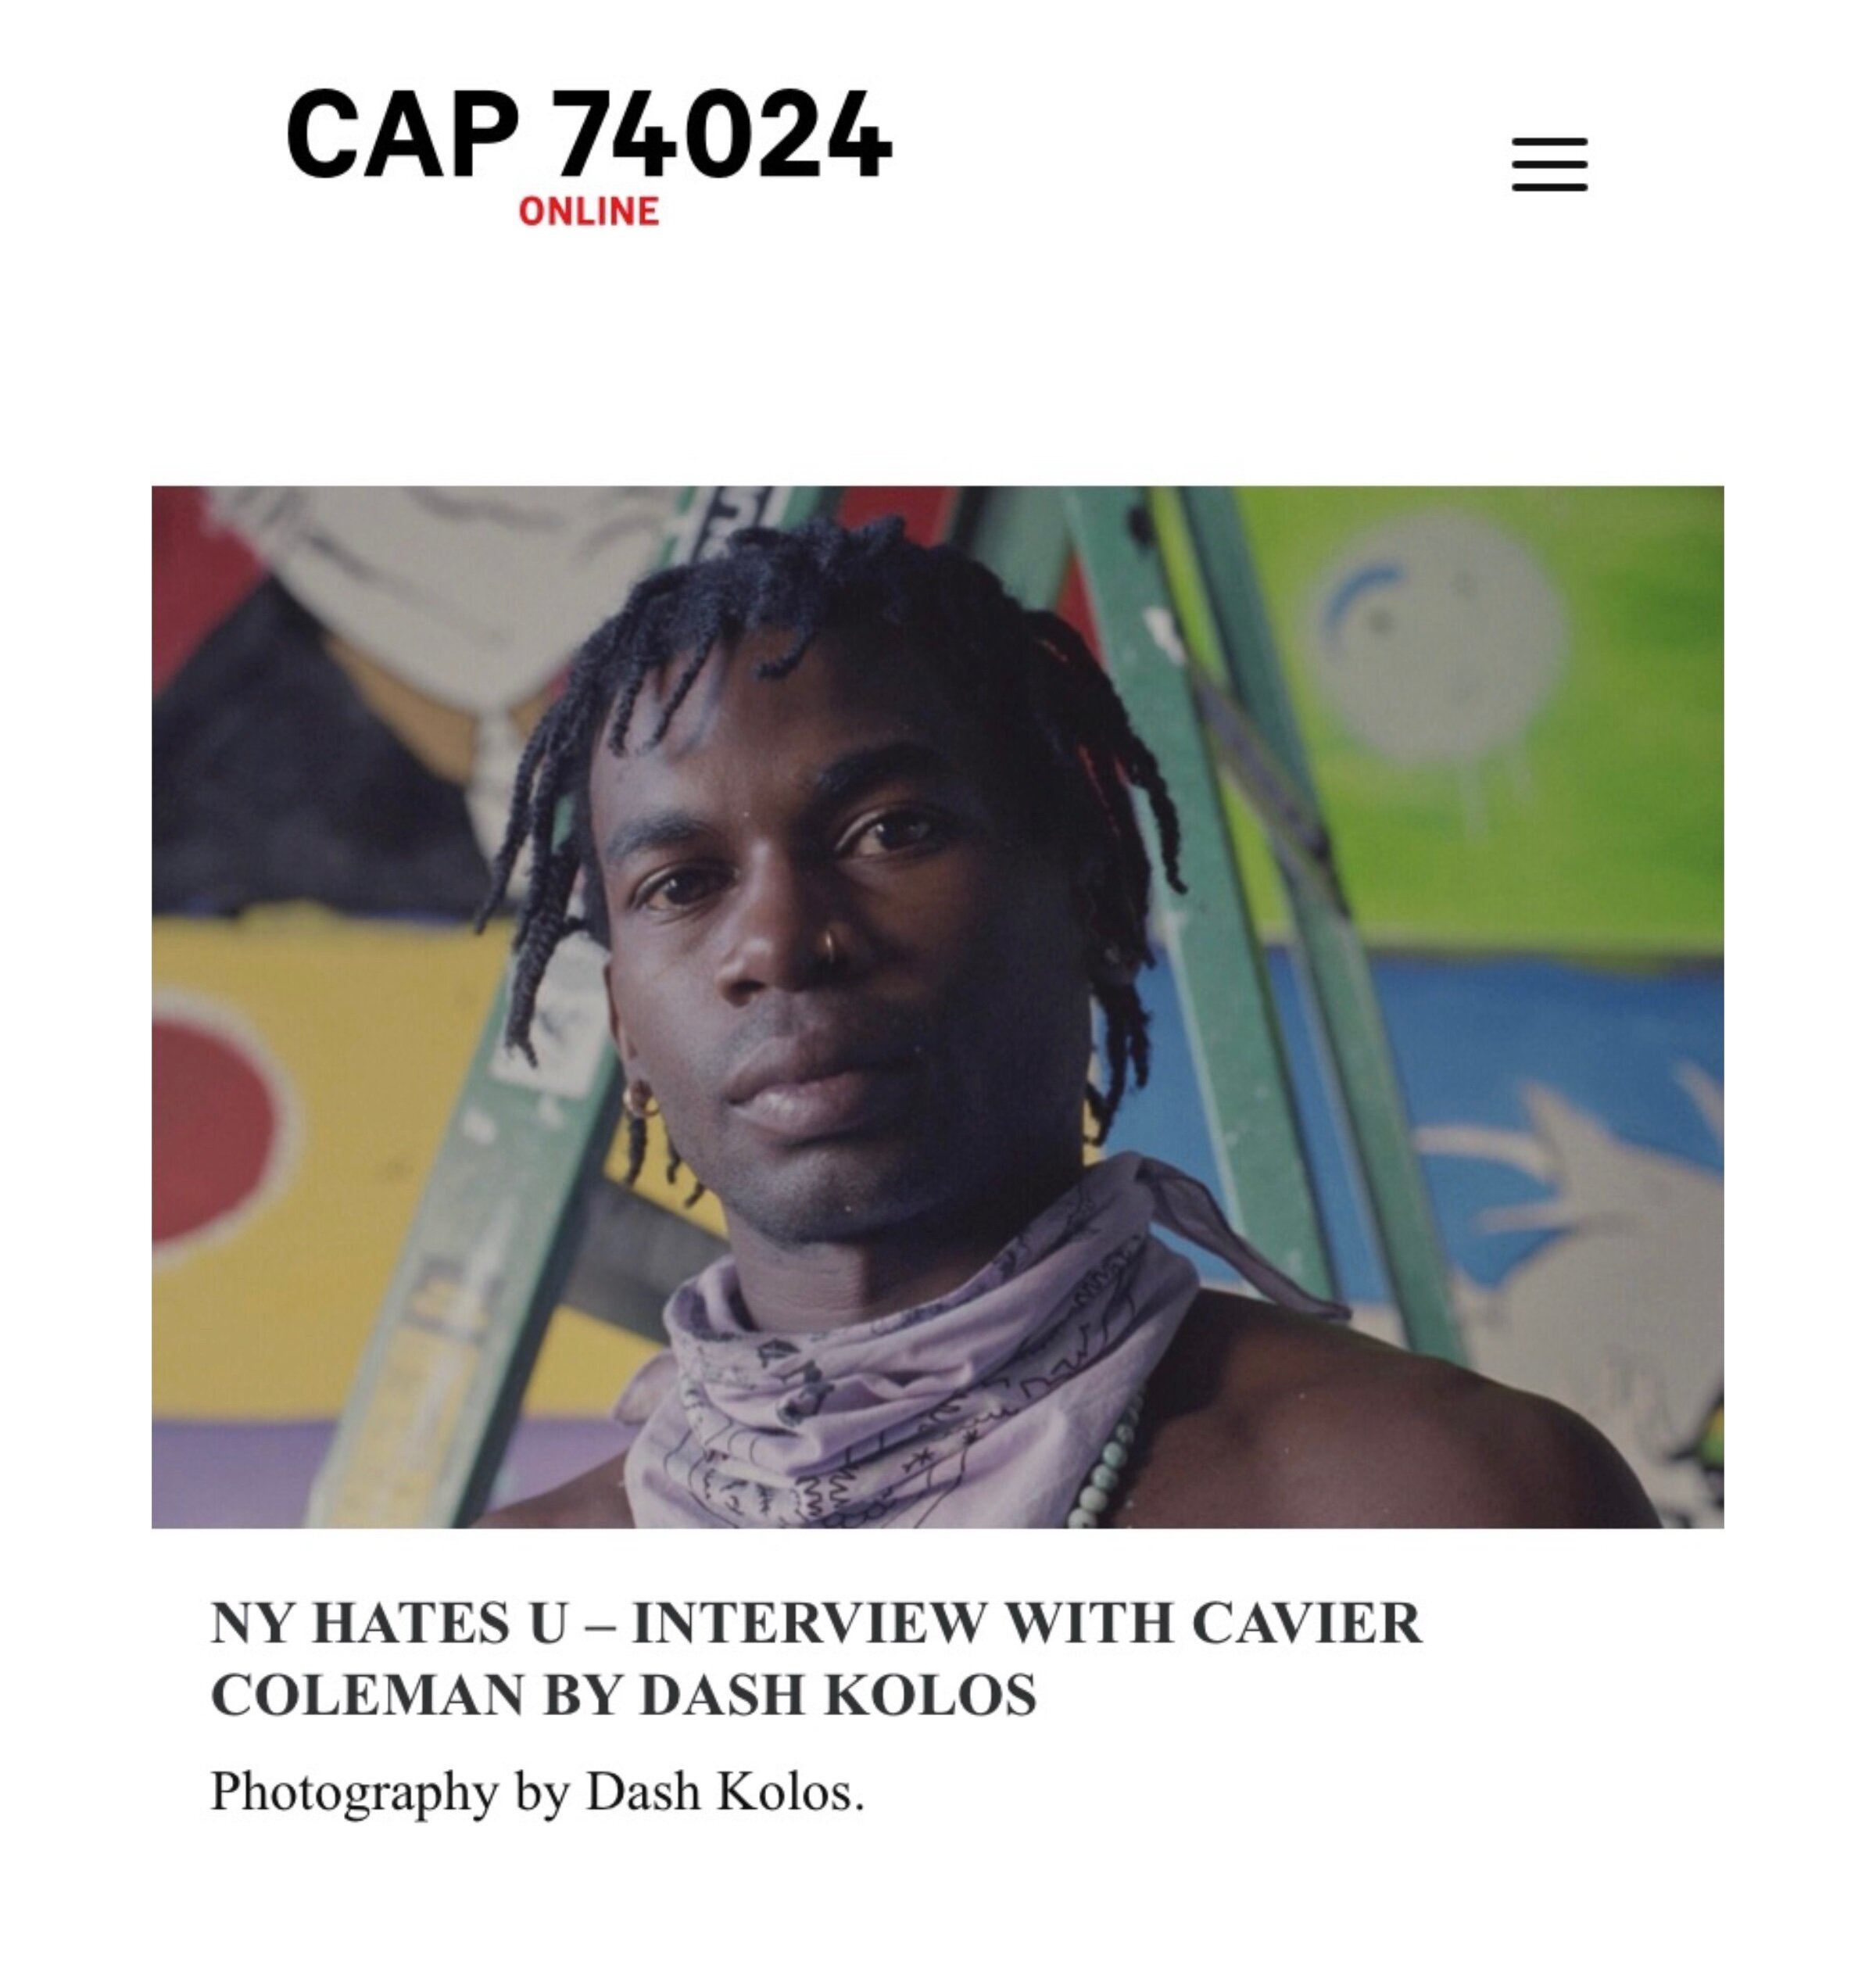 Interview with Cavier Coleman by Dash Kolos for CAP 74024 